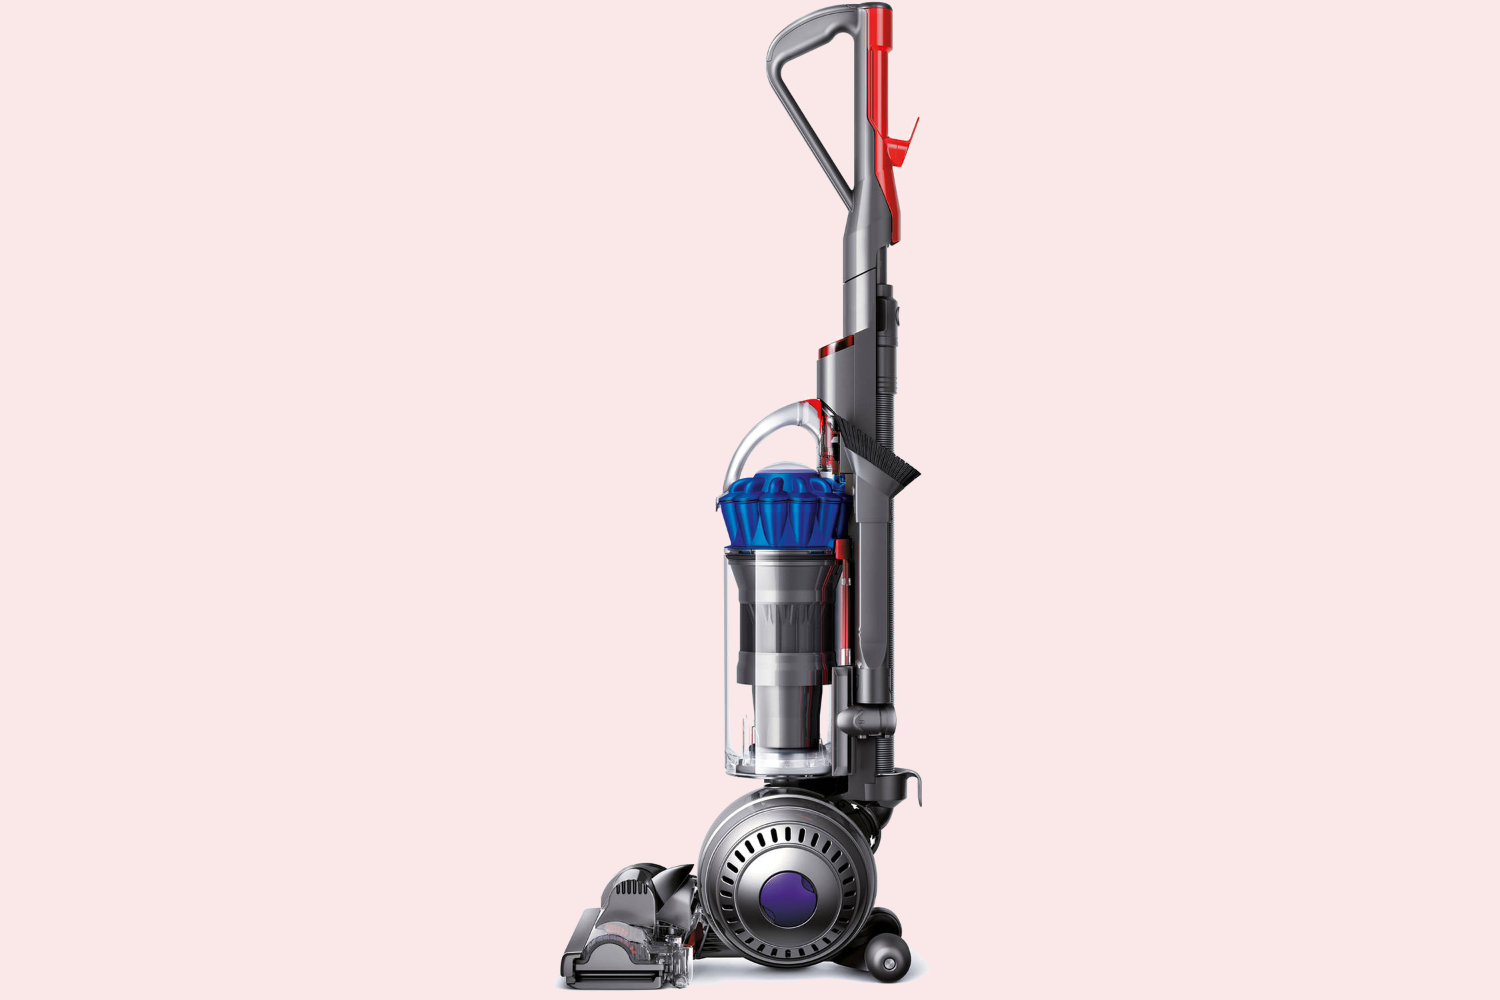 Dyson Light Ball upright vacuum from a side angle.